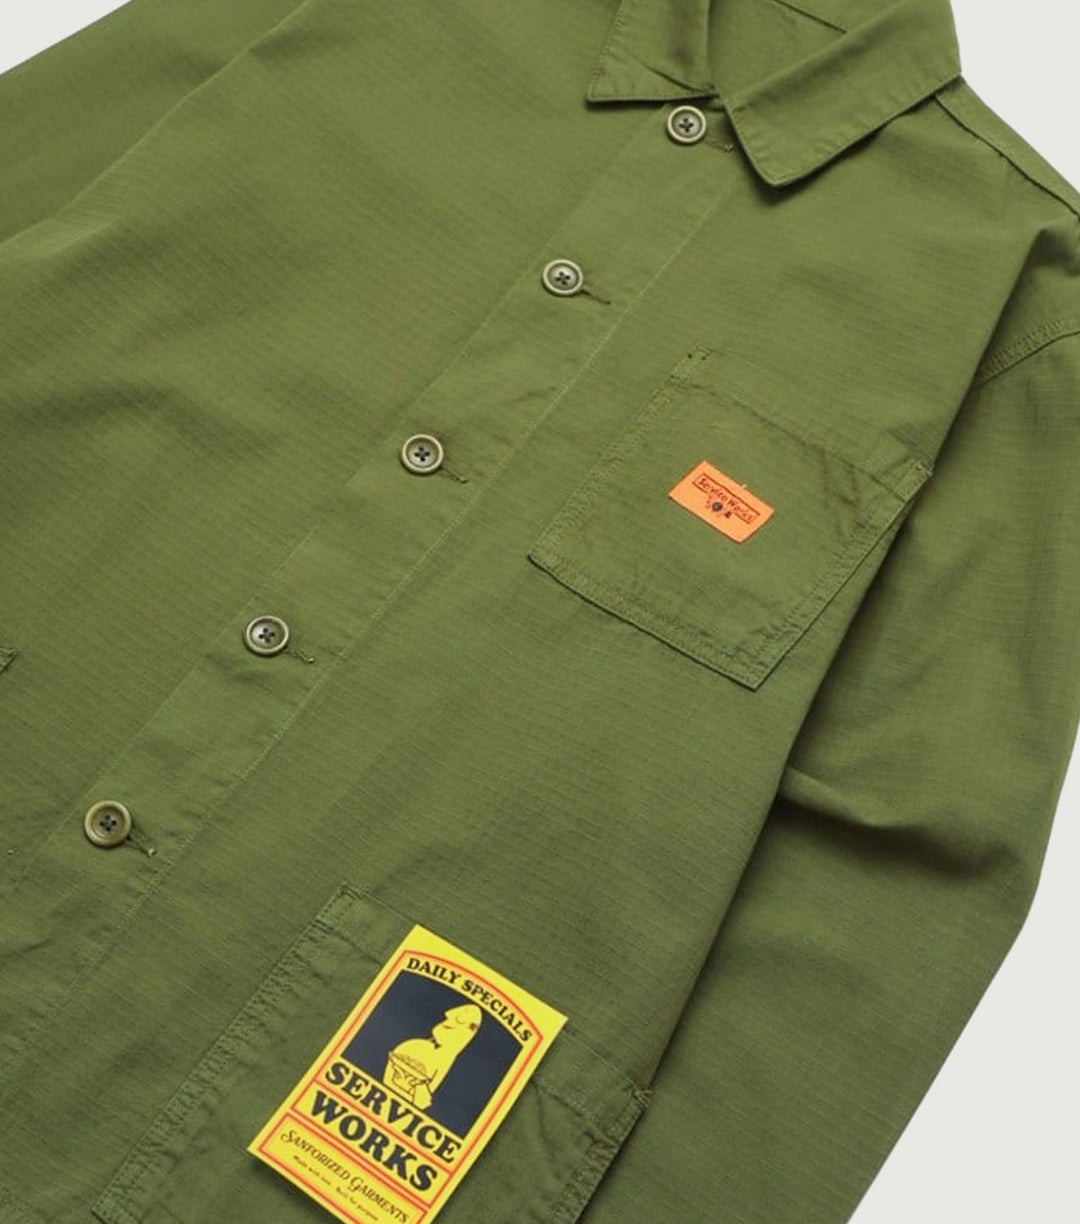 Ripstop Coverall Jacket - ServiceWorks